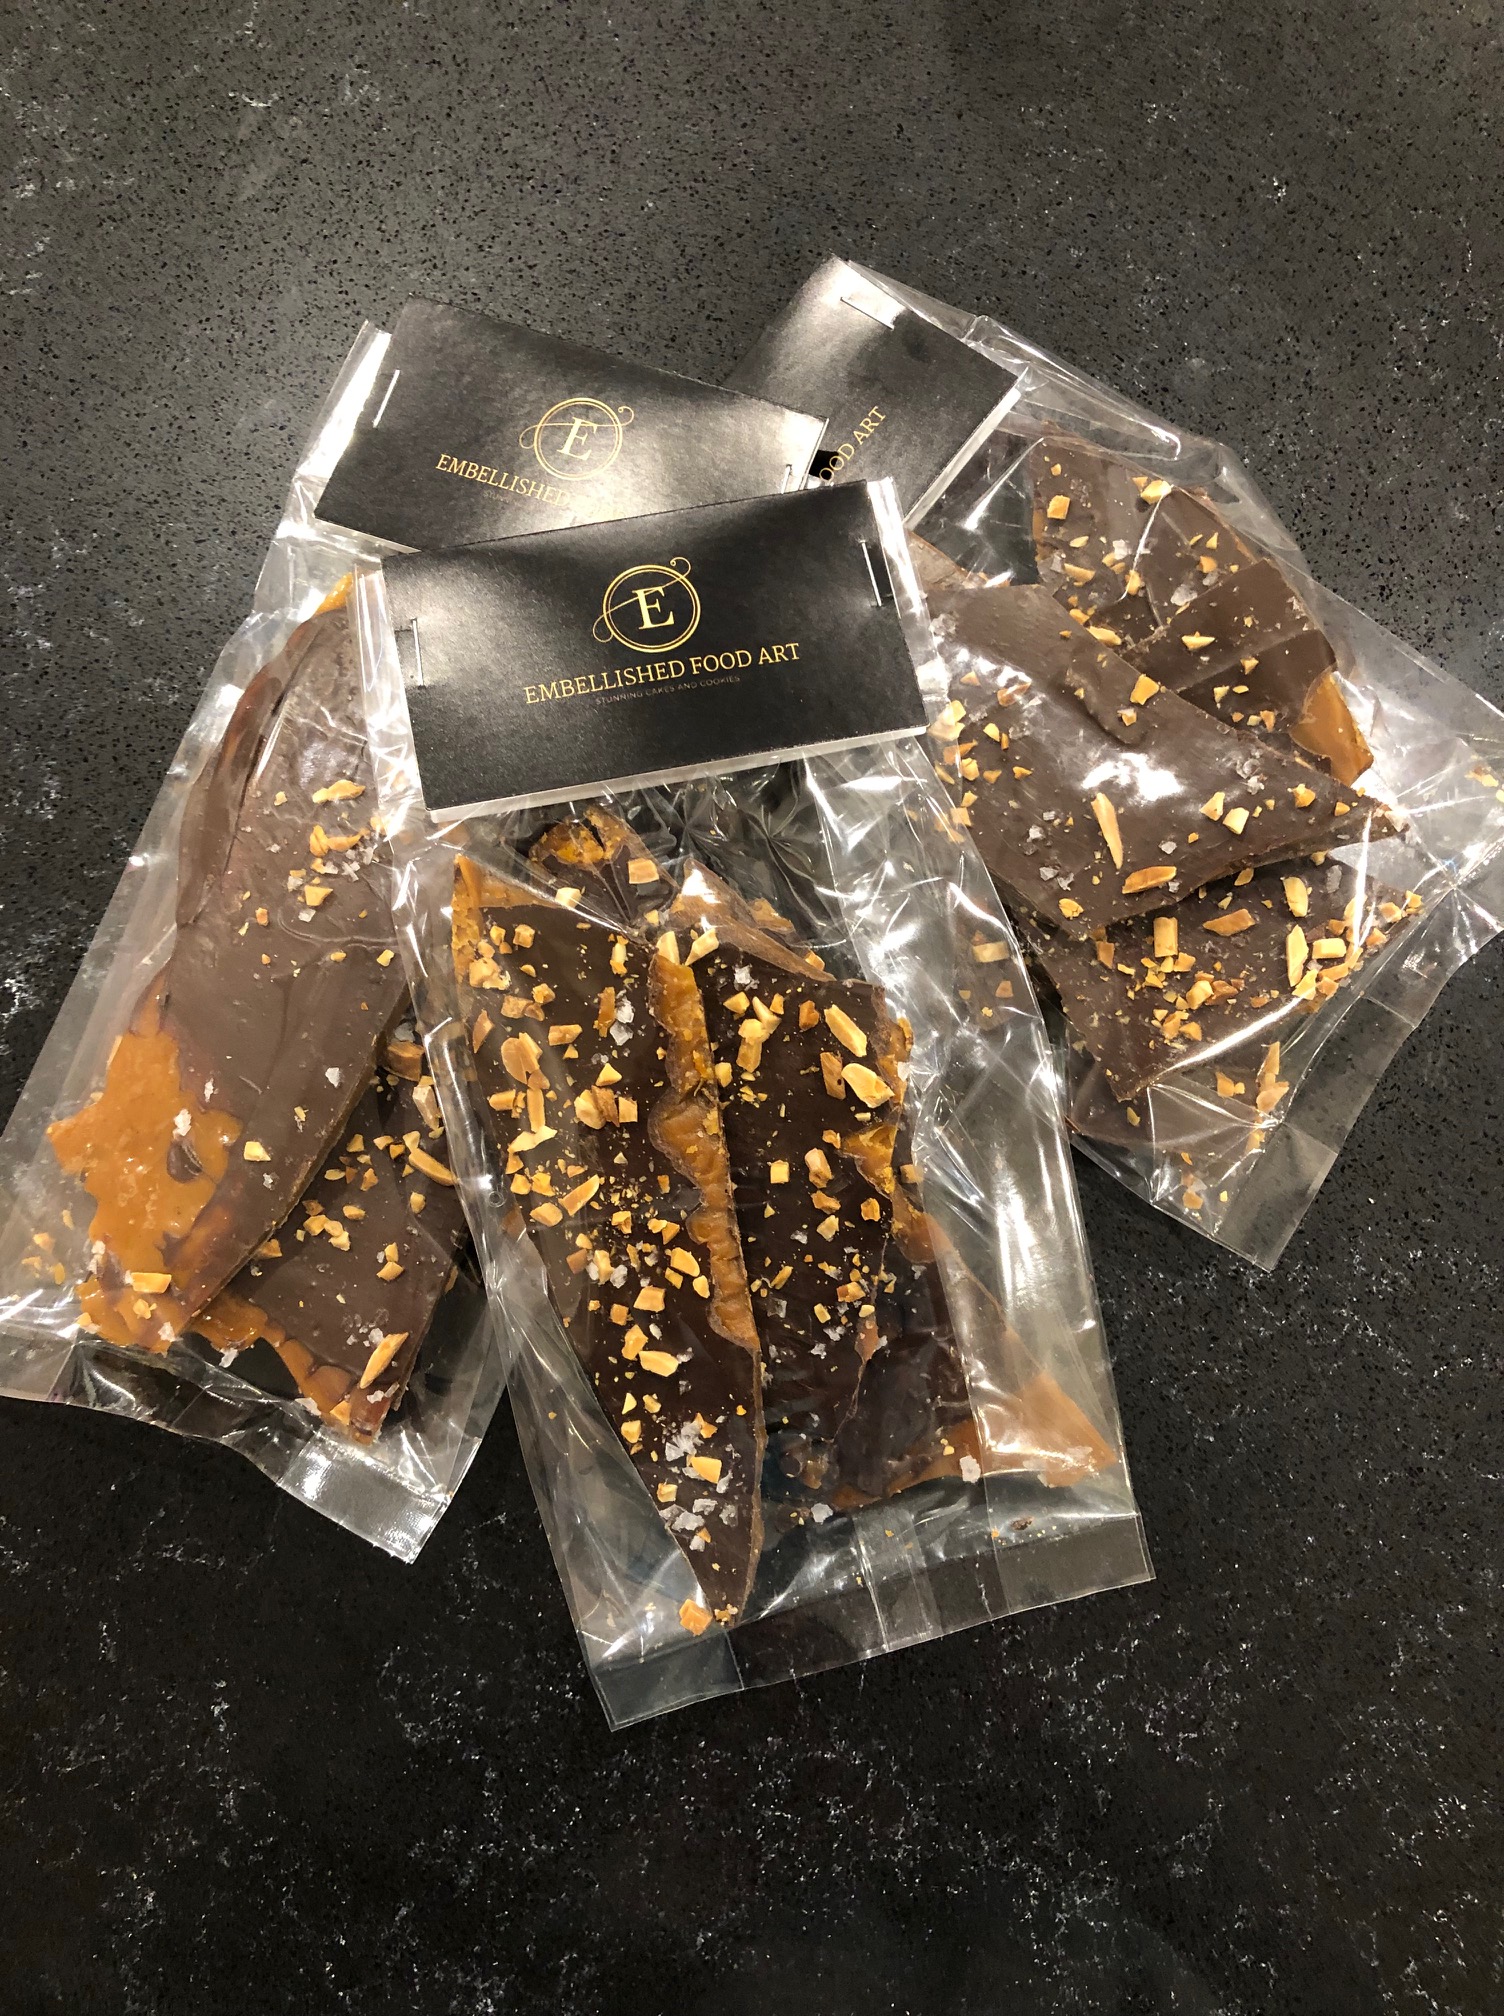 The yummiest toffee bark coated in dark chocolate with almonds and salt crystals